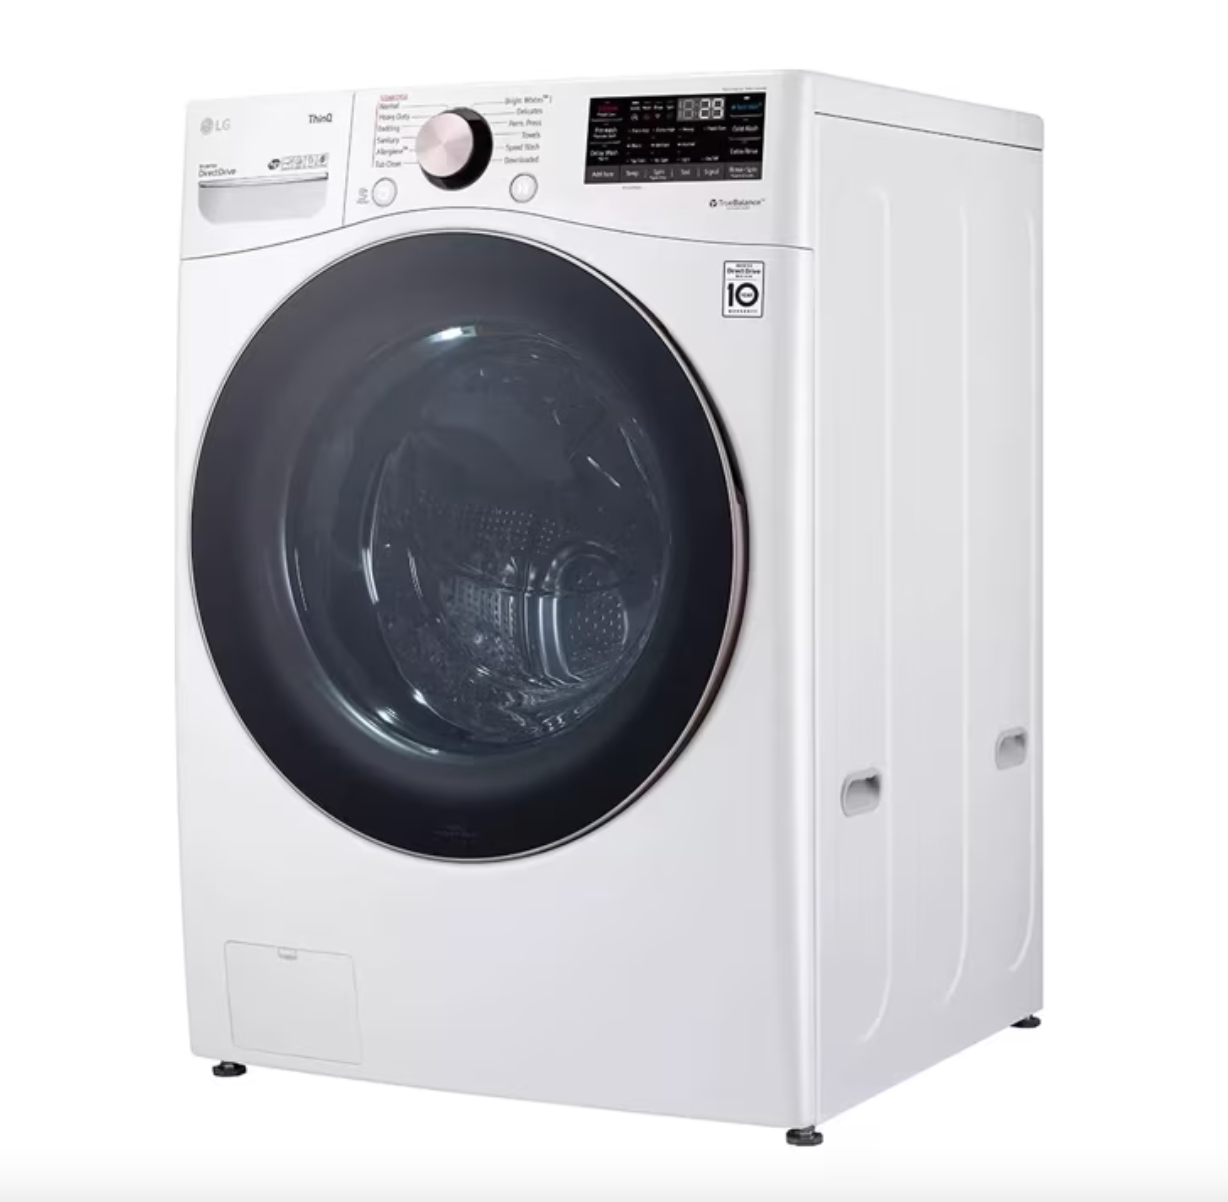 The washing machine in white, with a round dial and digital panel